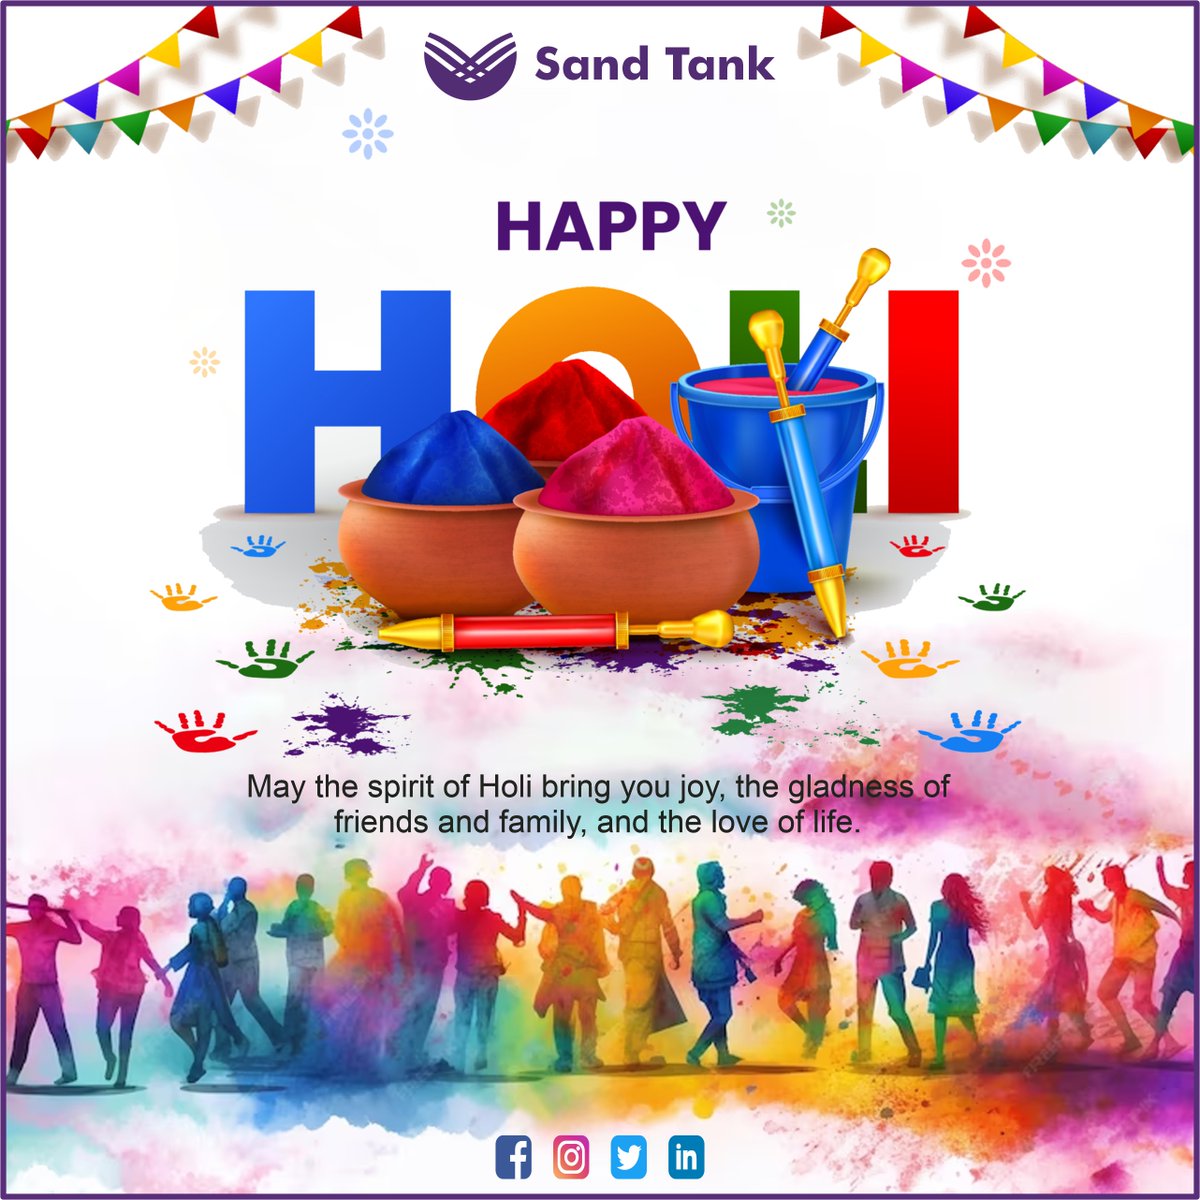 Holi hai! Let's paint the town with hues of joy and laughter. Wishing you a Holi filled with love, laughter, and countless colorful moments. Play safe, spread love! 🎨🥳

#Sandtankfoundation #Holi #HappyHoli #ColorfulCelebration #HoliFestival #Holi2024 #PlayWithColors